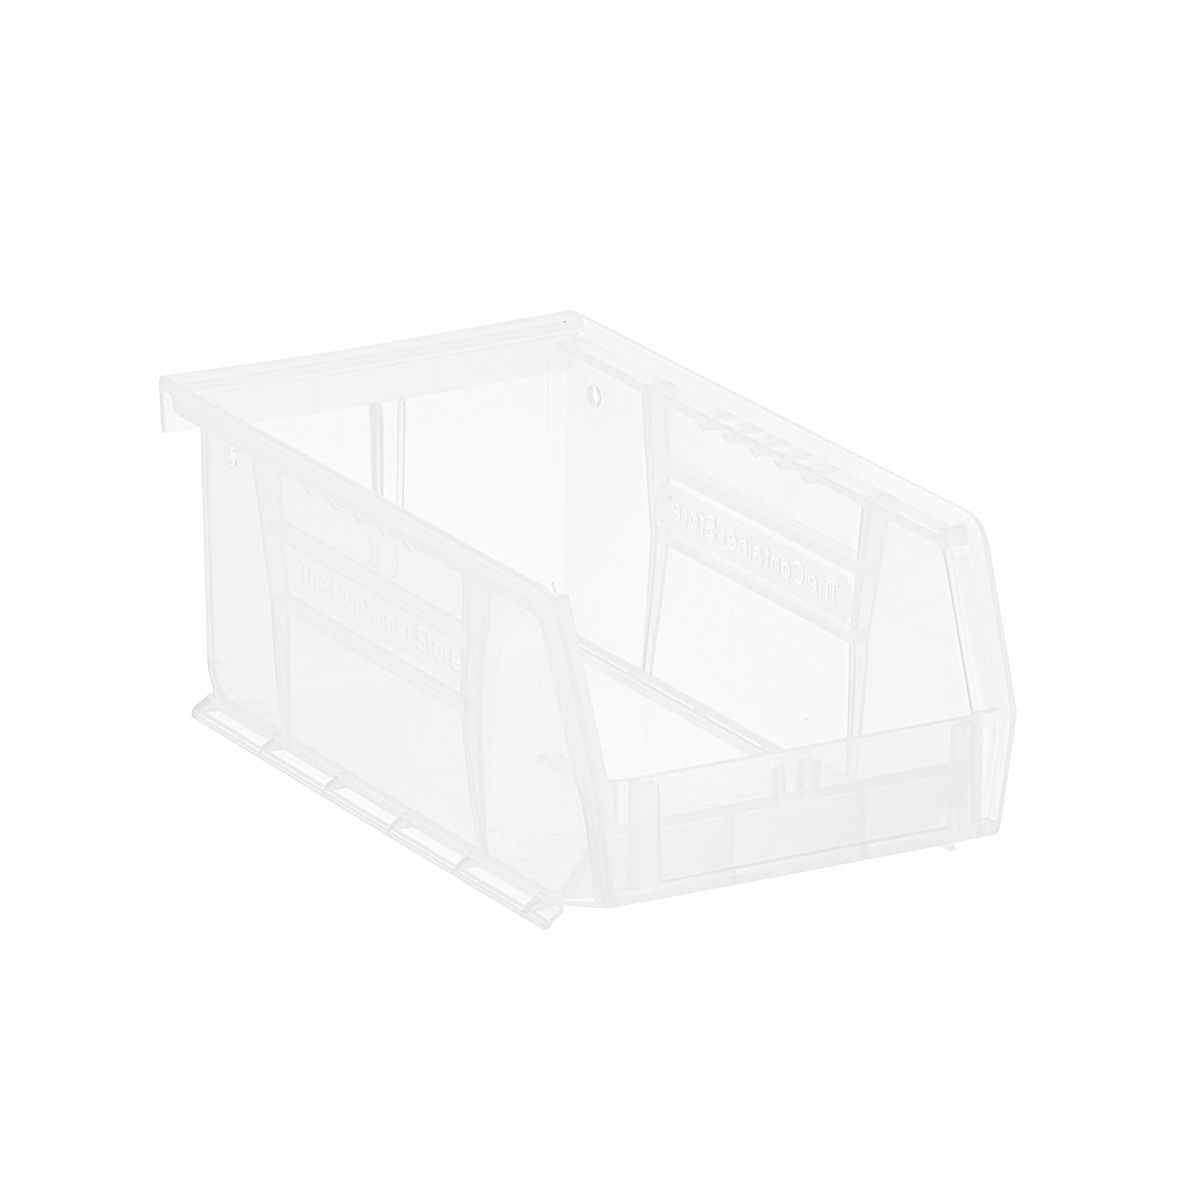 https://www.containerstore.com/catalogimages/338500/10073788-quantum-utility-bin-extra-n.jpg